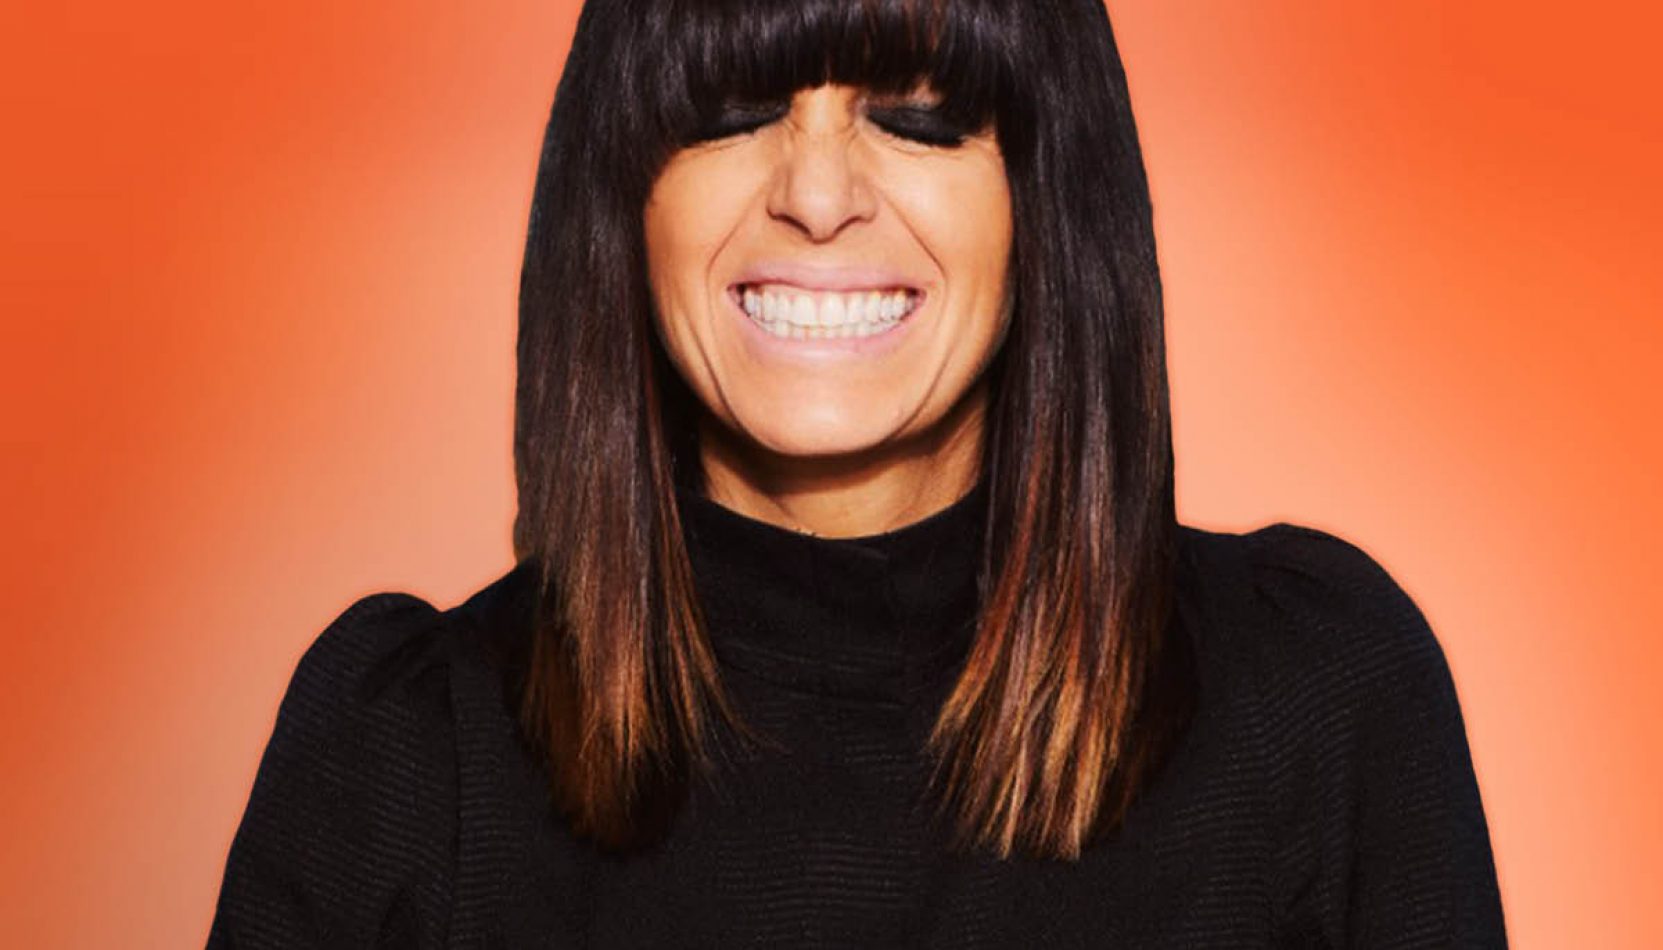 claudias winkleman, behind the fringe, g live, guildford, surrey., whats on, guide to, guide to whats on, guide to surrey, surrey, guildford, guide to guildford, comedy, an evening with, an audience with,